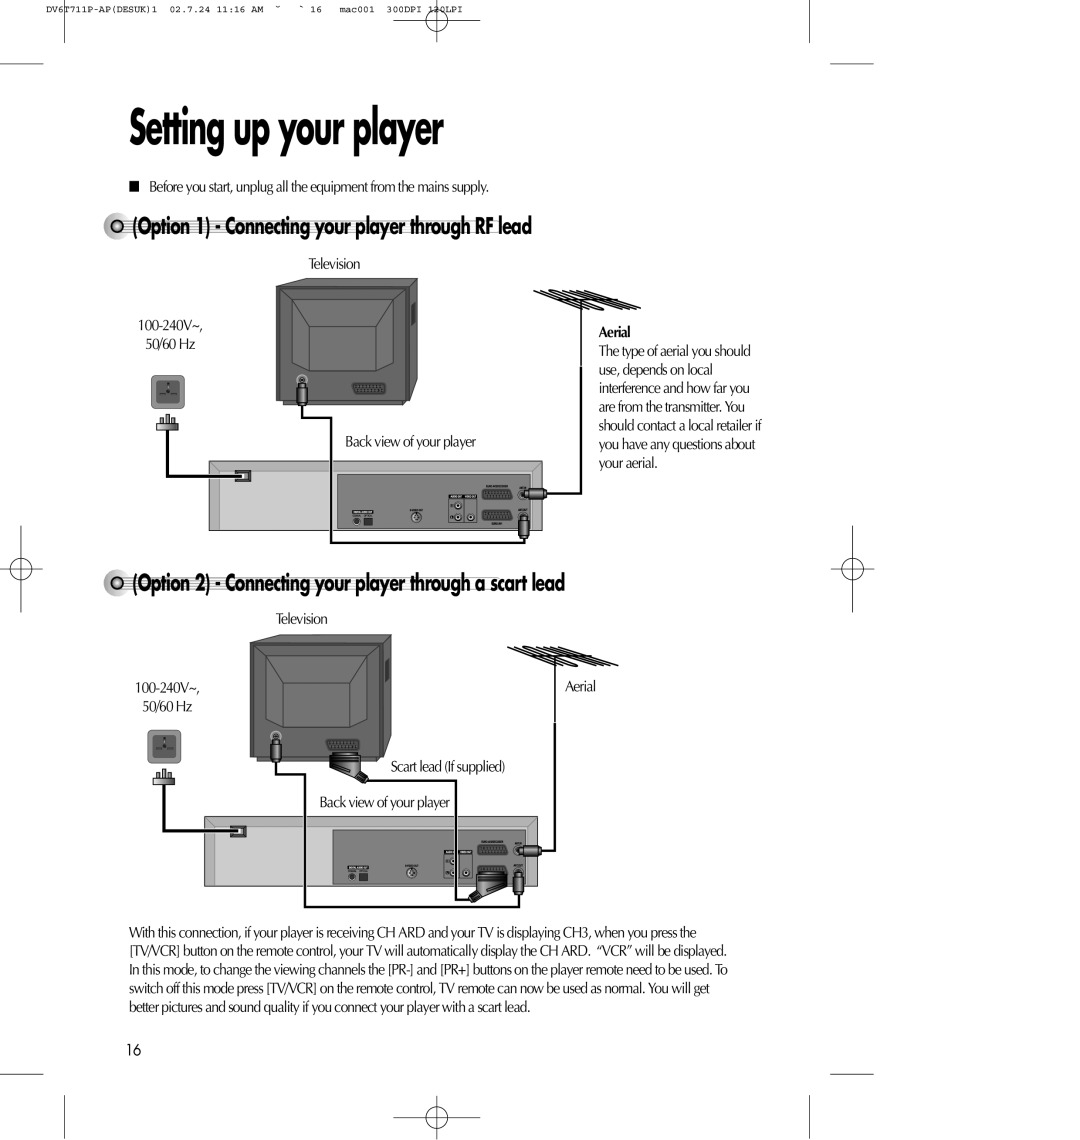 Daewoo SD-2100P Setting up your player, Option2-Connectingyourplayerthroughascart lead, 100-240V~, Aerial, 50/60 Hz 